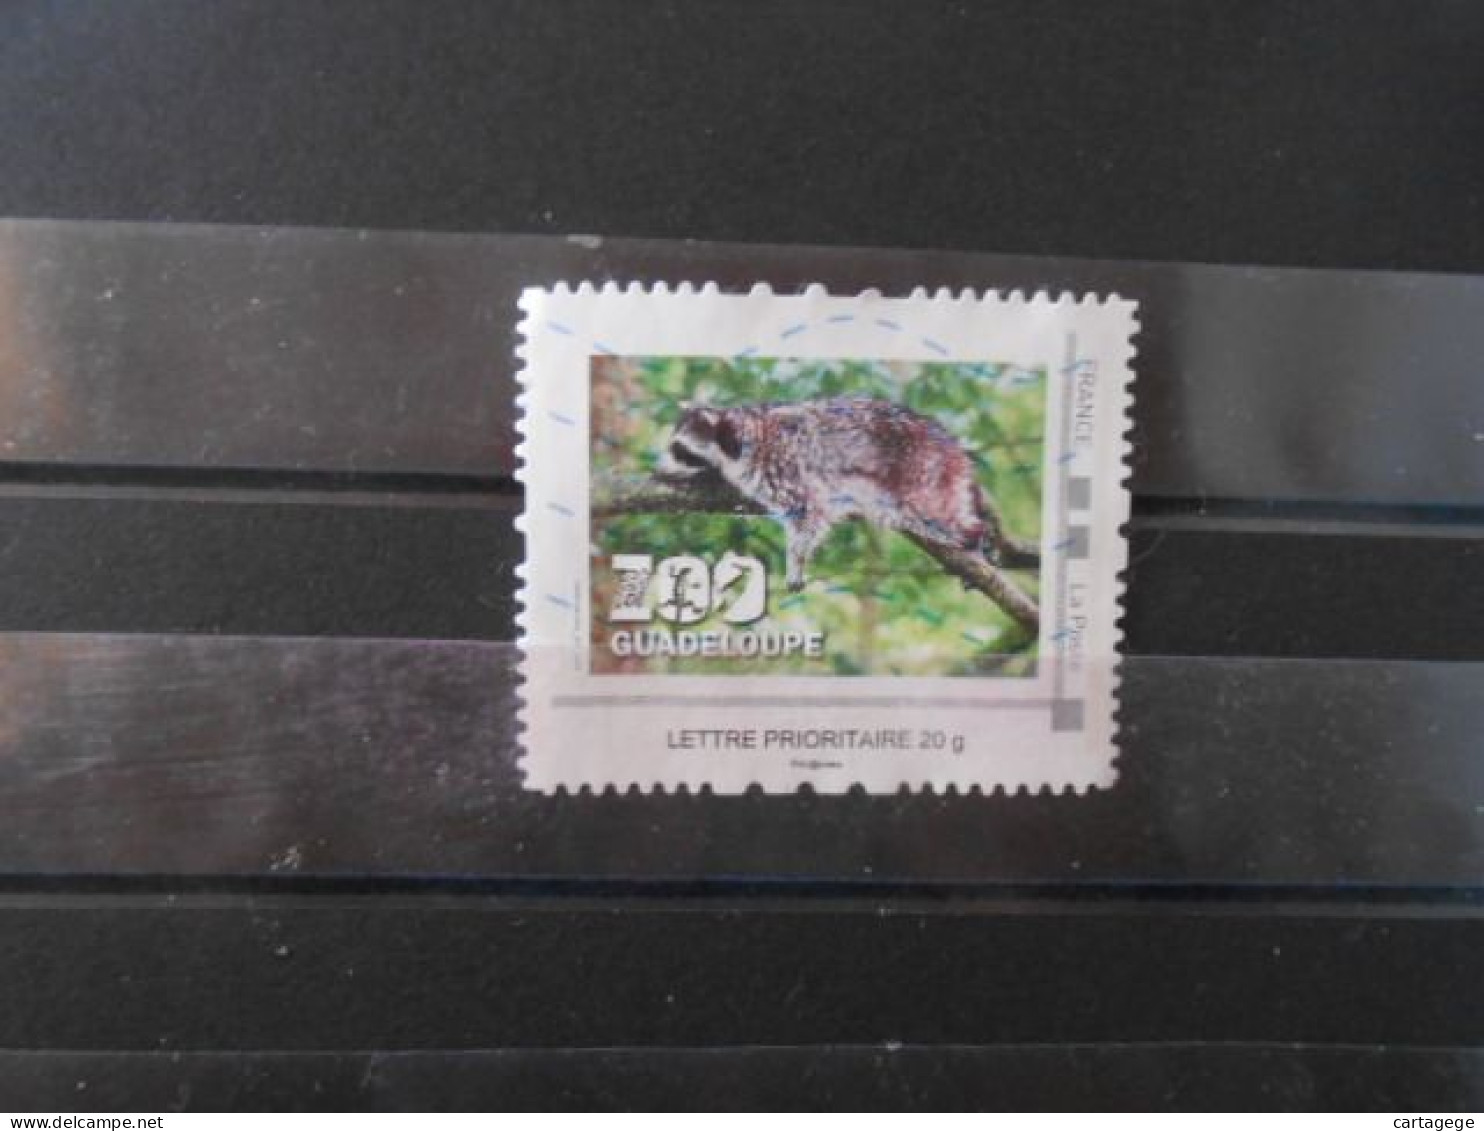 FRANCE PERSONNALISE : ZOO GUADELOUPE - Used Stamps